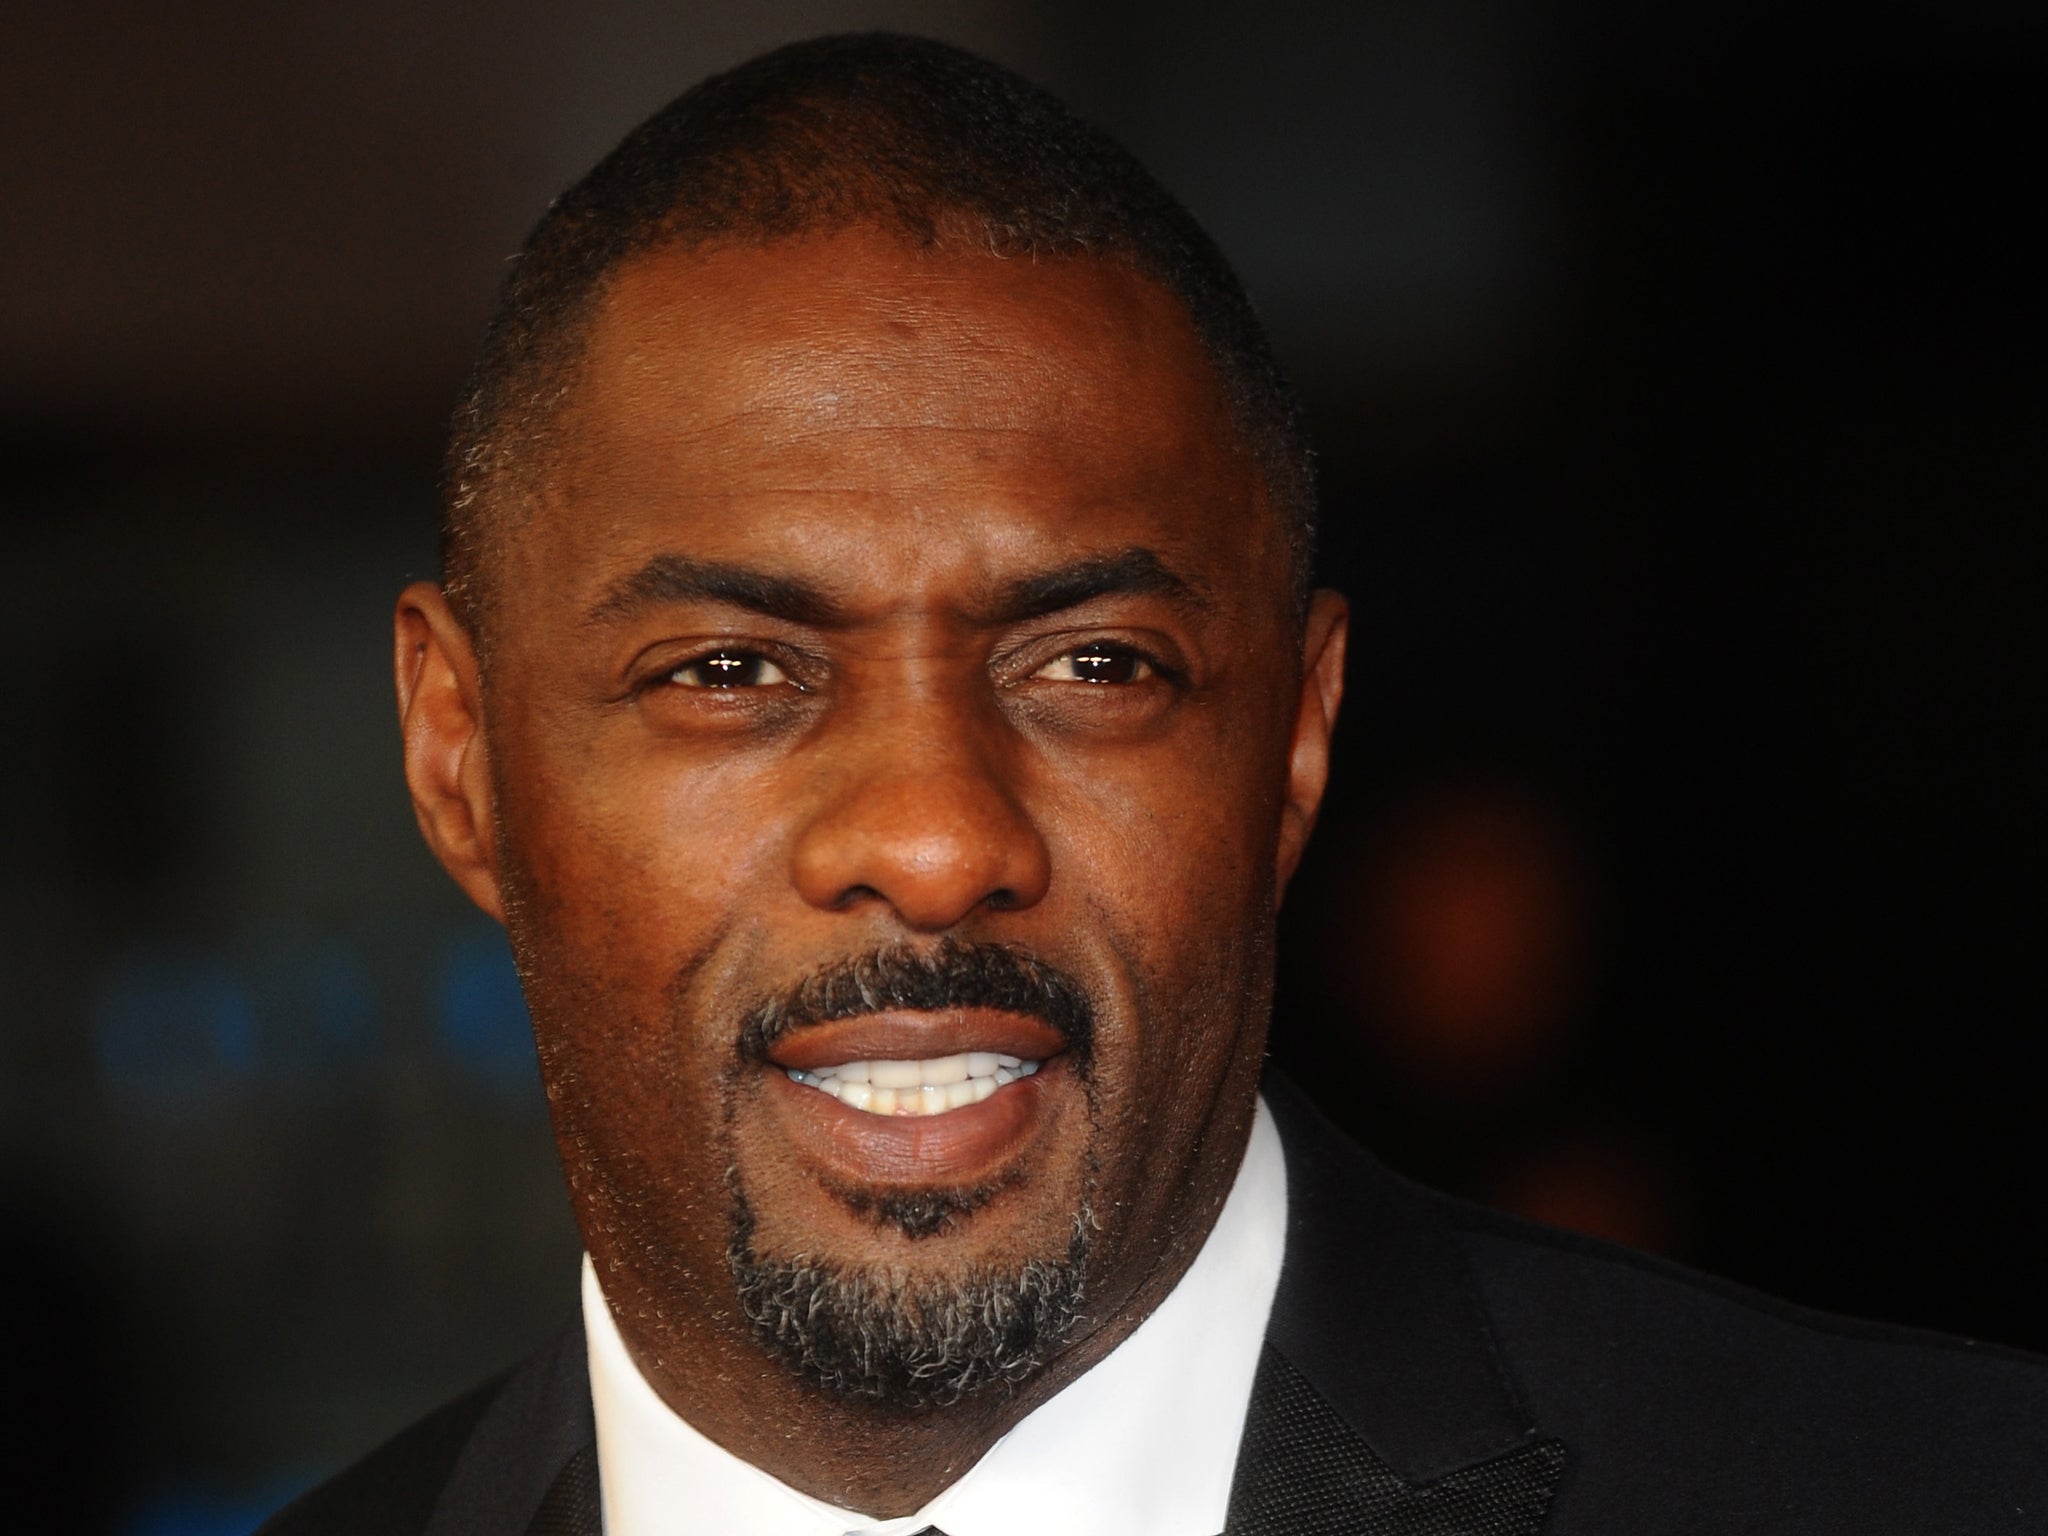 Idris Elba answered fans' questions in a Reddit AMA session 